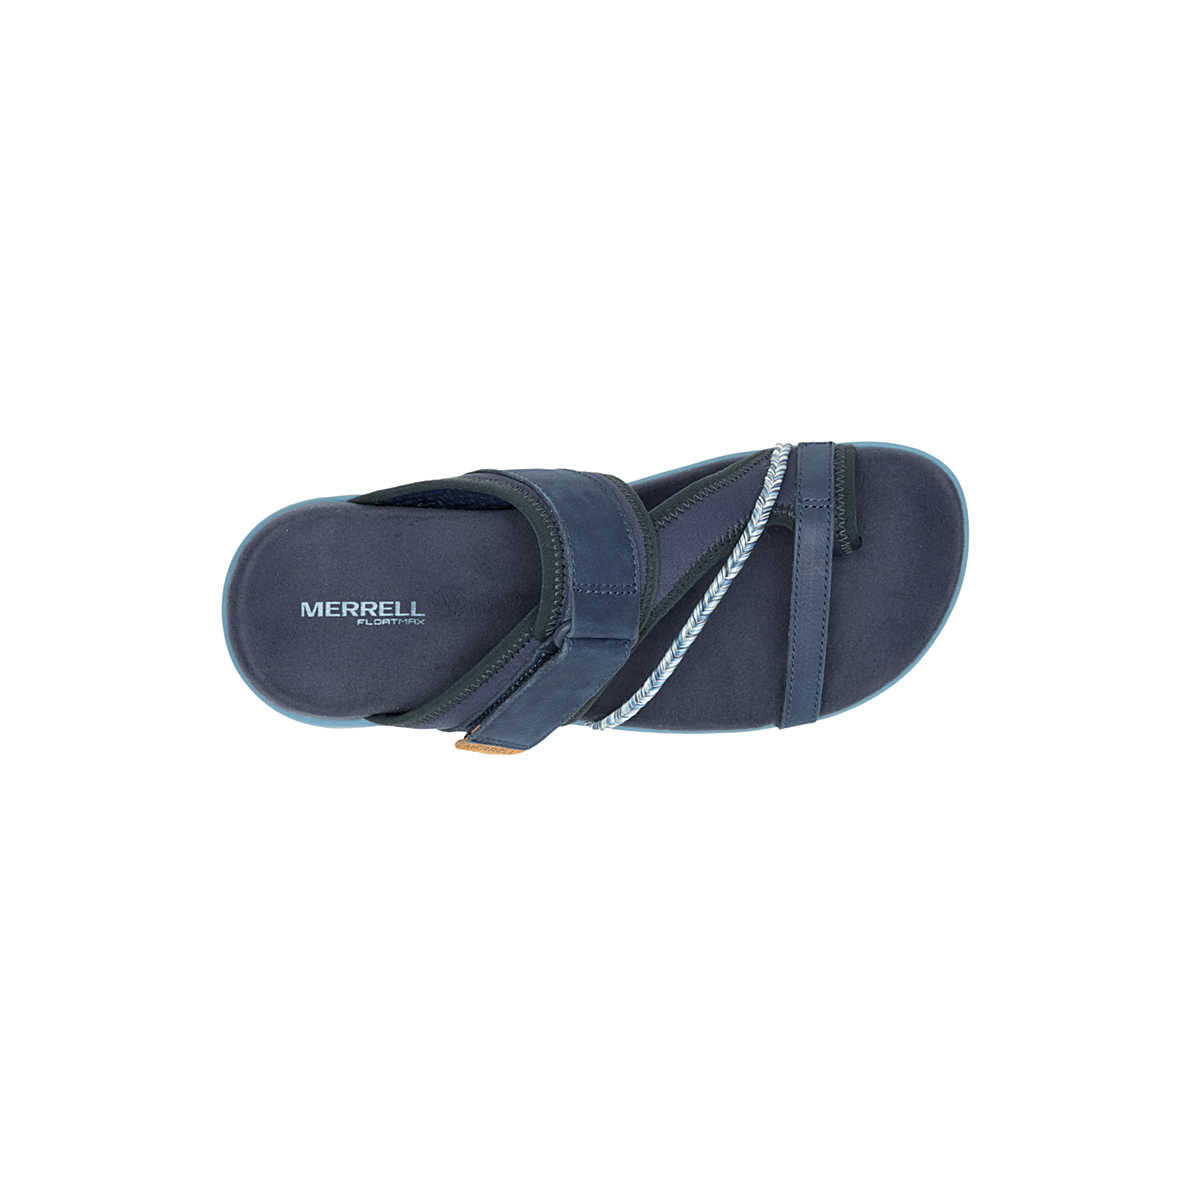 A single navy blue Merrell Terran 4 Post Sea sandal viewed from above, featuring an adjustable strap and a gray trim.